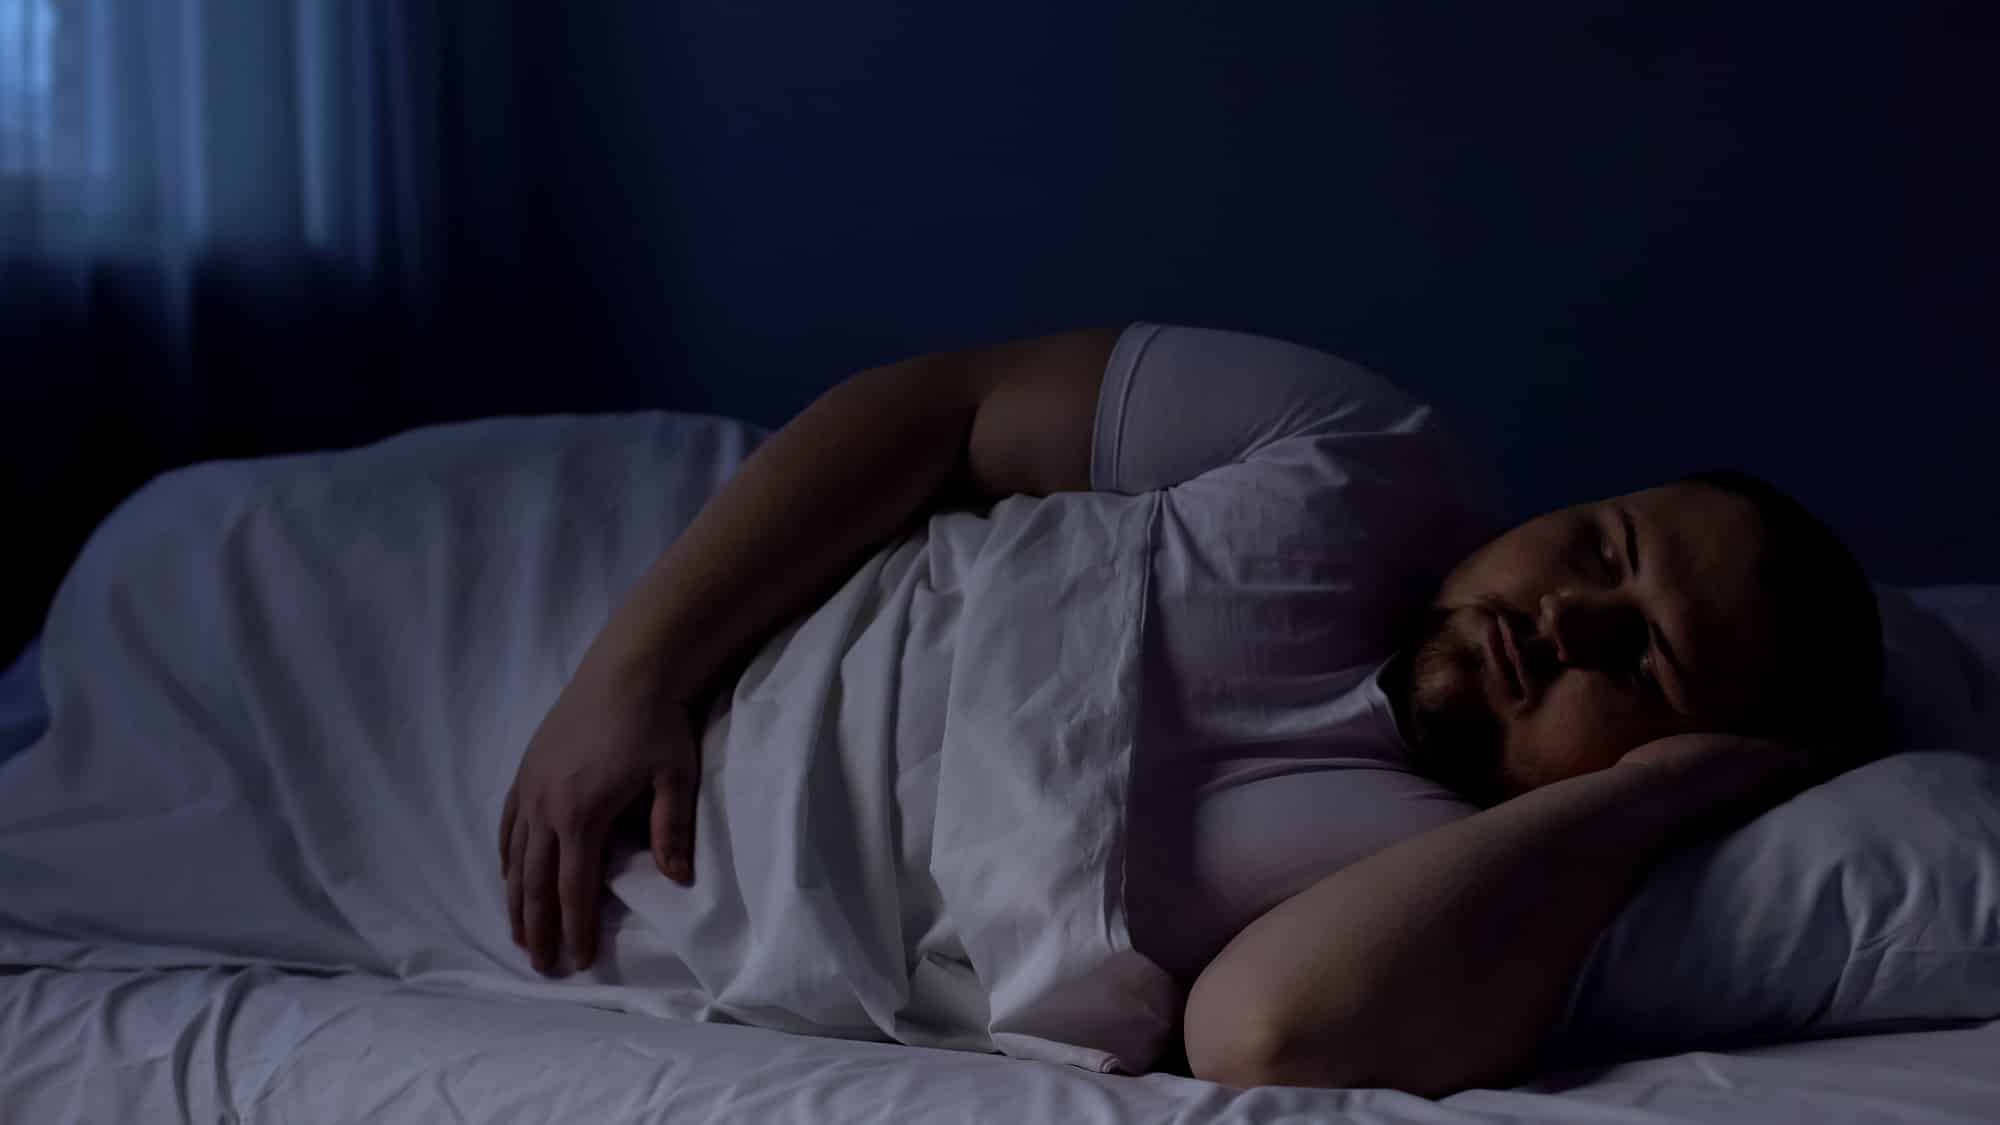 Obese man sleeping in bed, relaxing at night on comfortable mattress